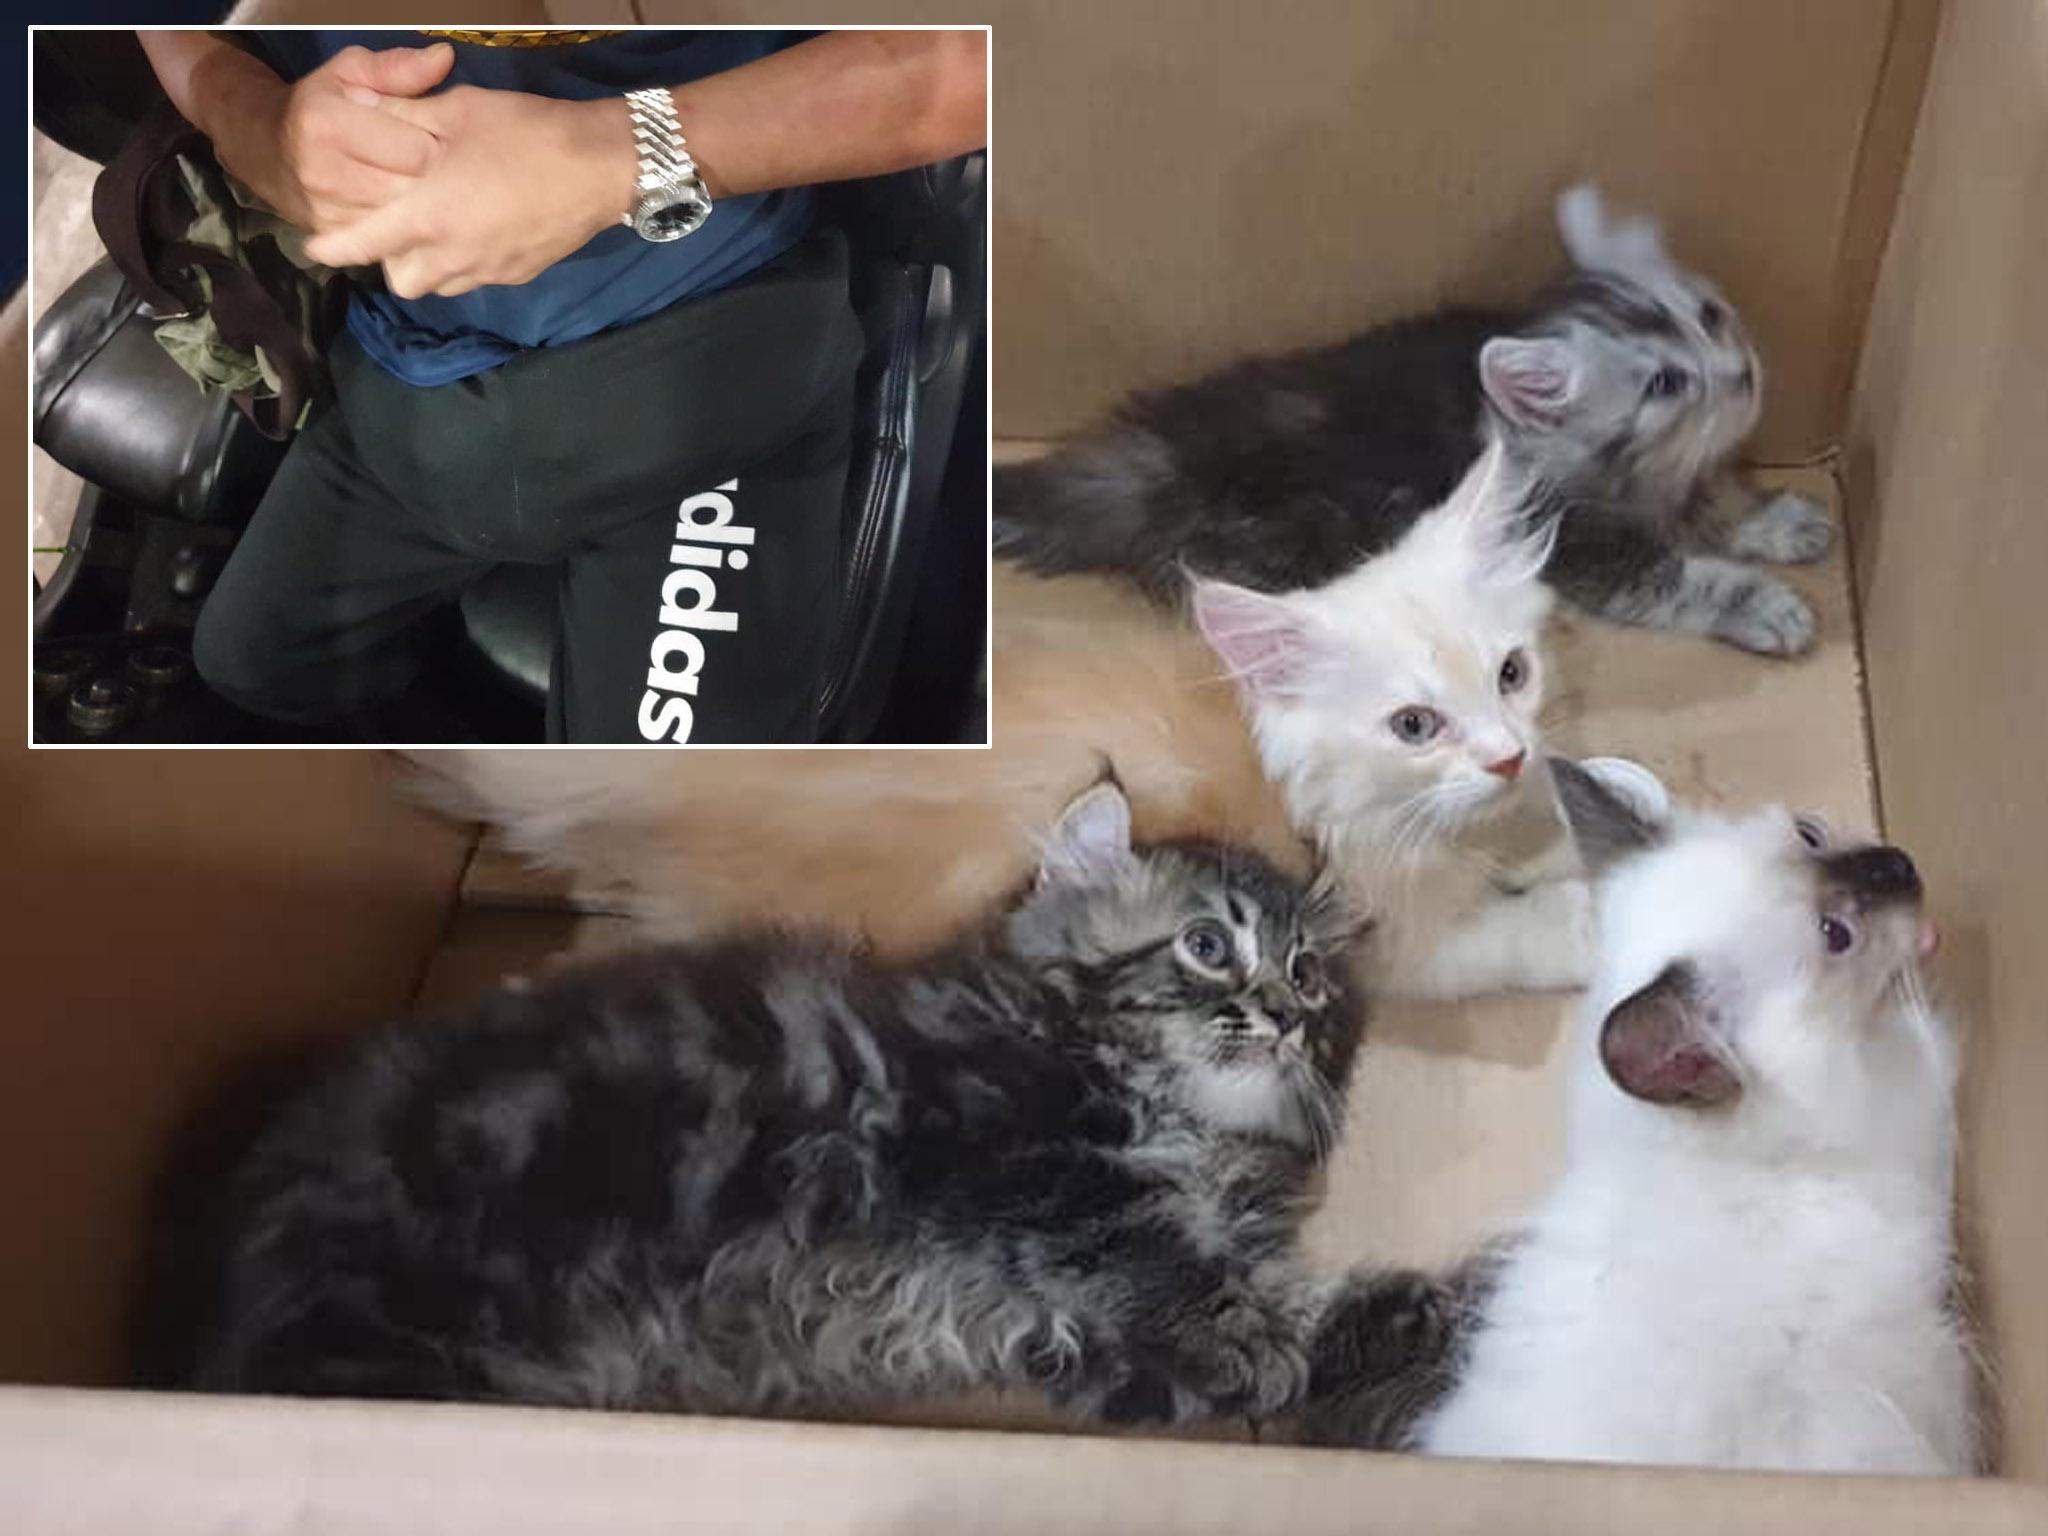 Four kittens were found hidden in a man's trousers